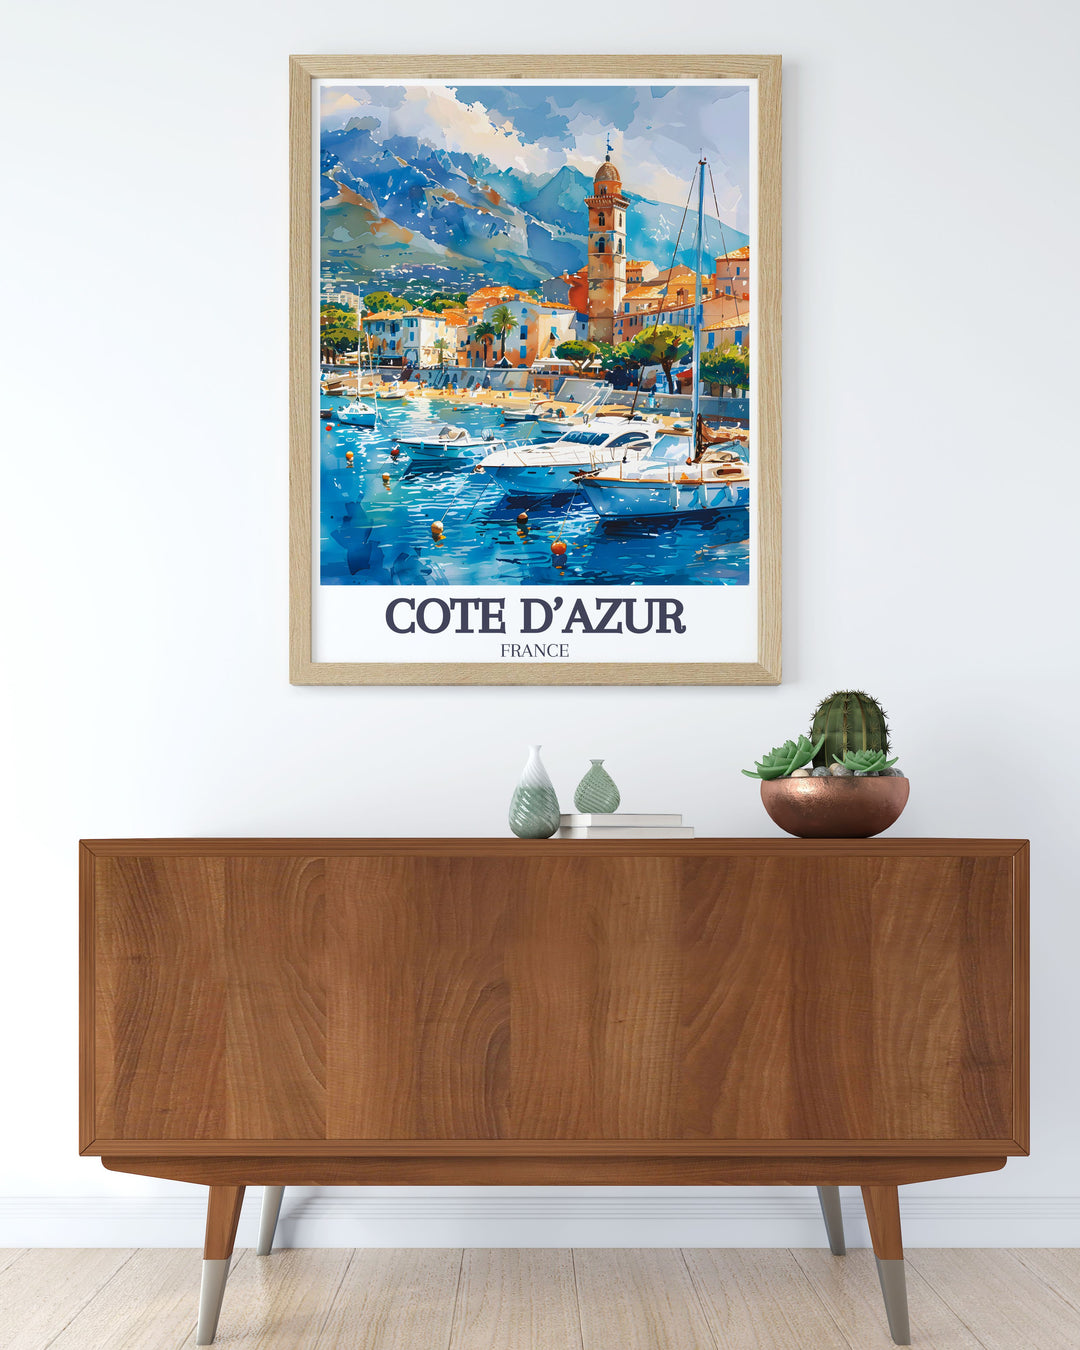 Marvel at the glamour of La Croisette, capturing the elegance of Cannes iconic promenade and the shimmering Mediterranean Sea in this stunning travel poster.